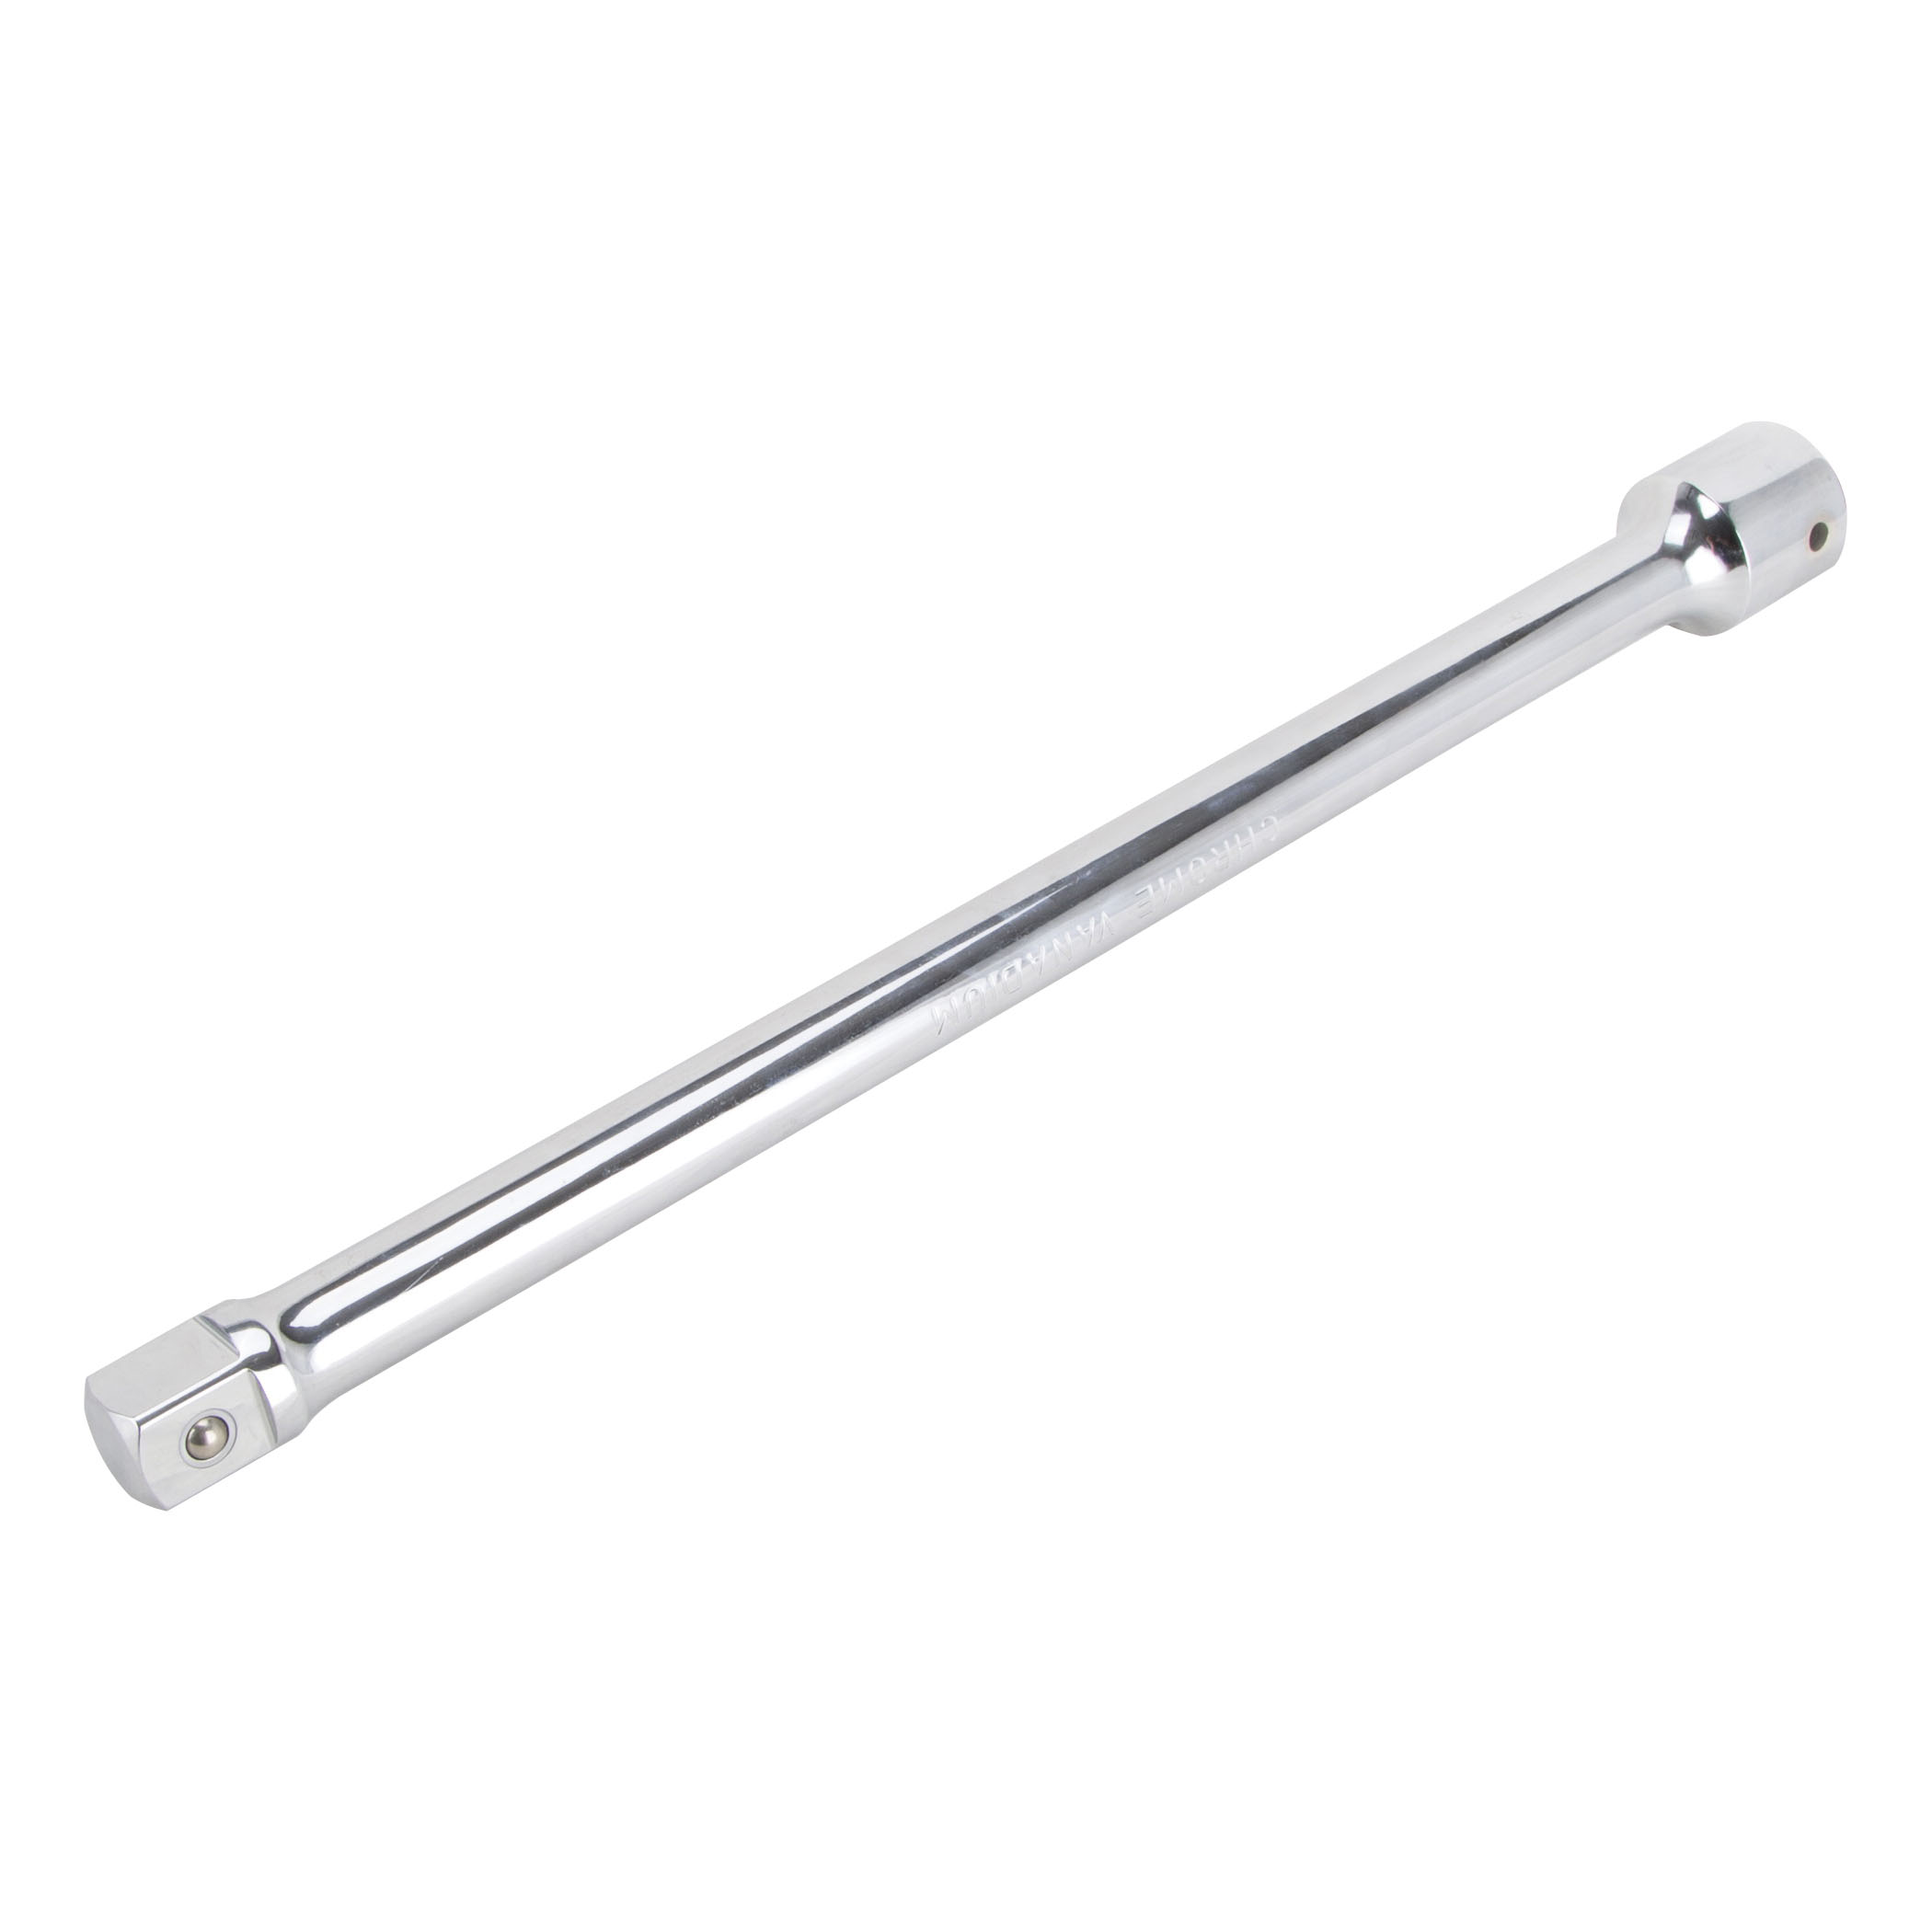 EB6016 Hang Tagged Extension Bar, 15-3/4 in L, Chrome